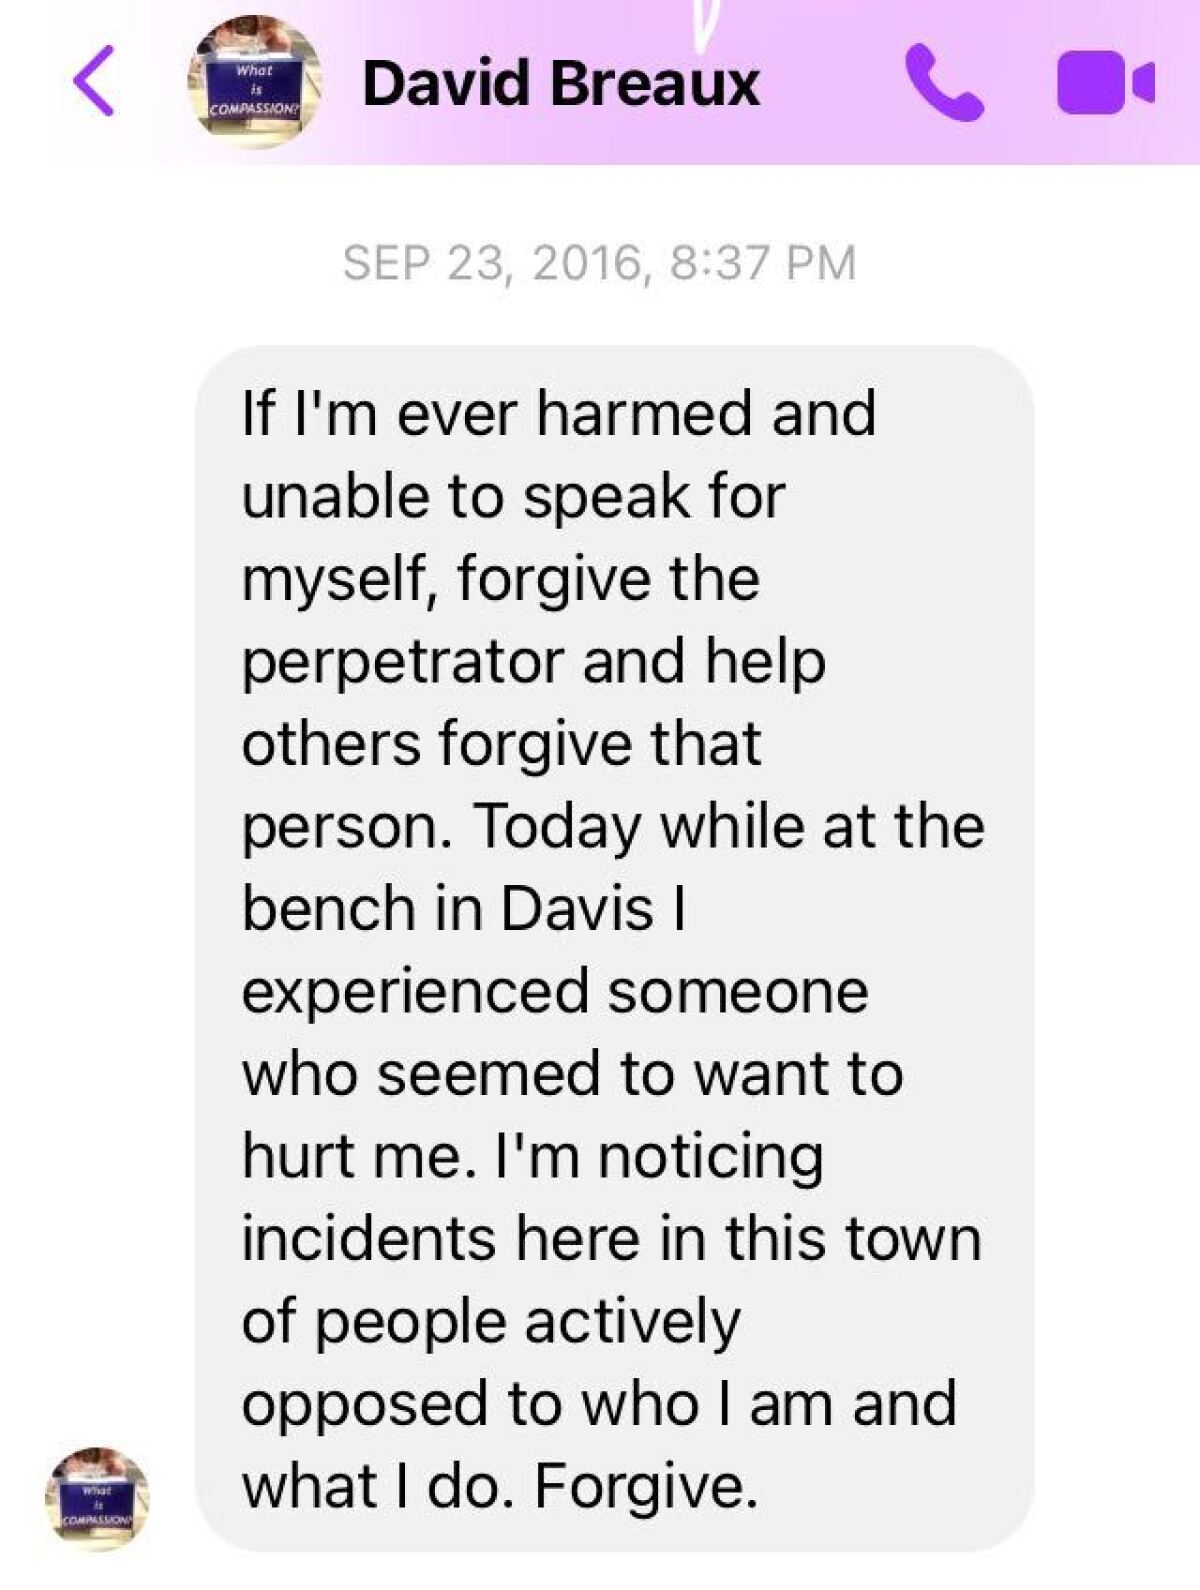 A text from David Breaux to his sister years before his fatal stabbing.